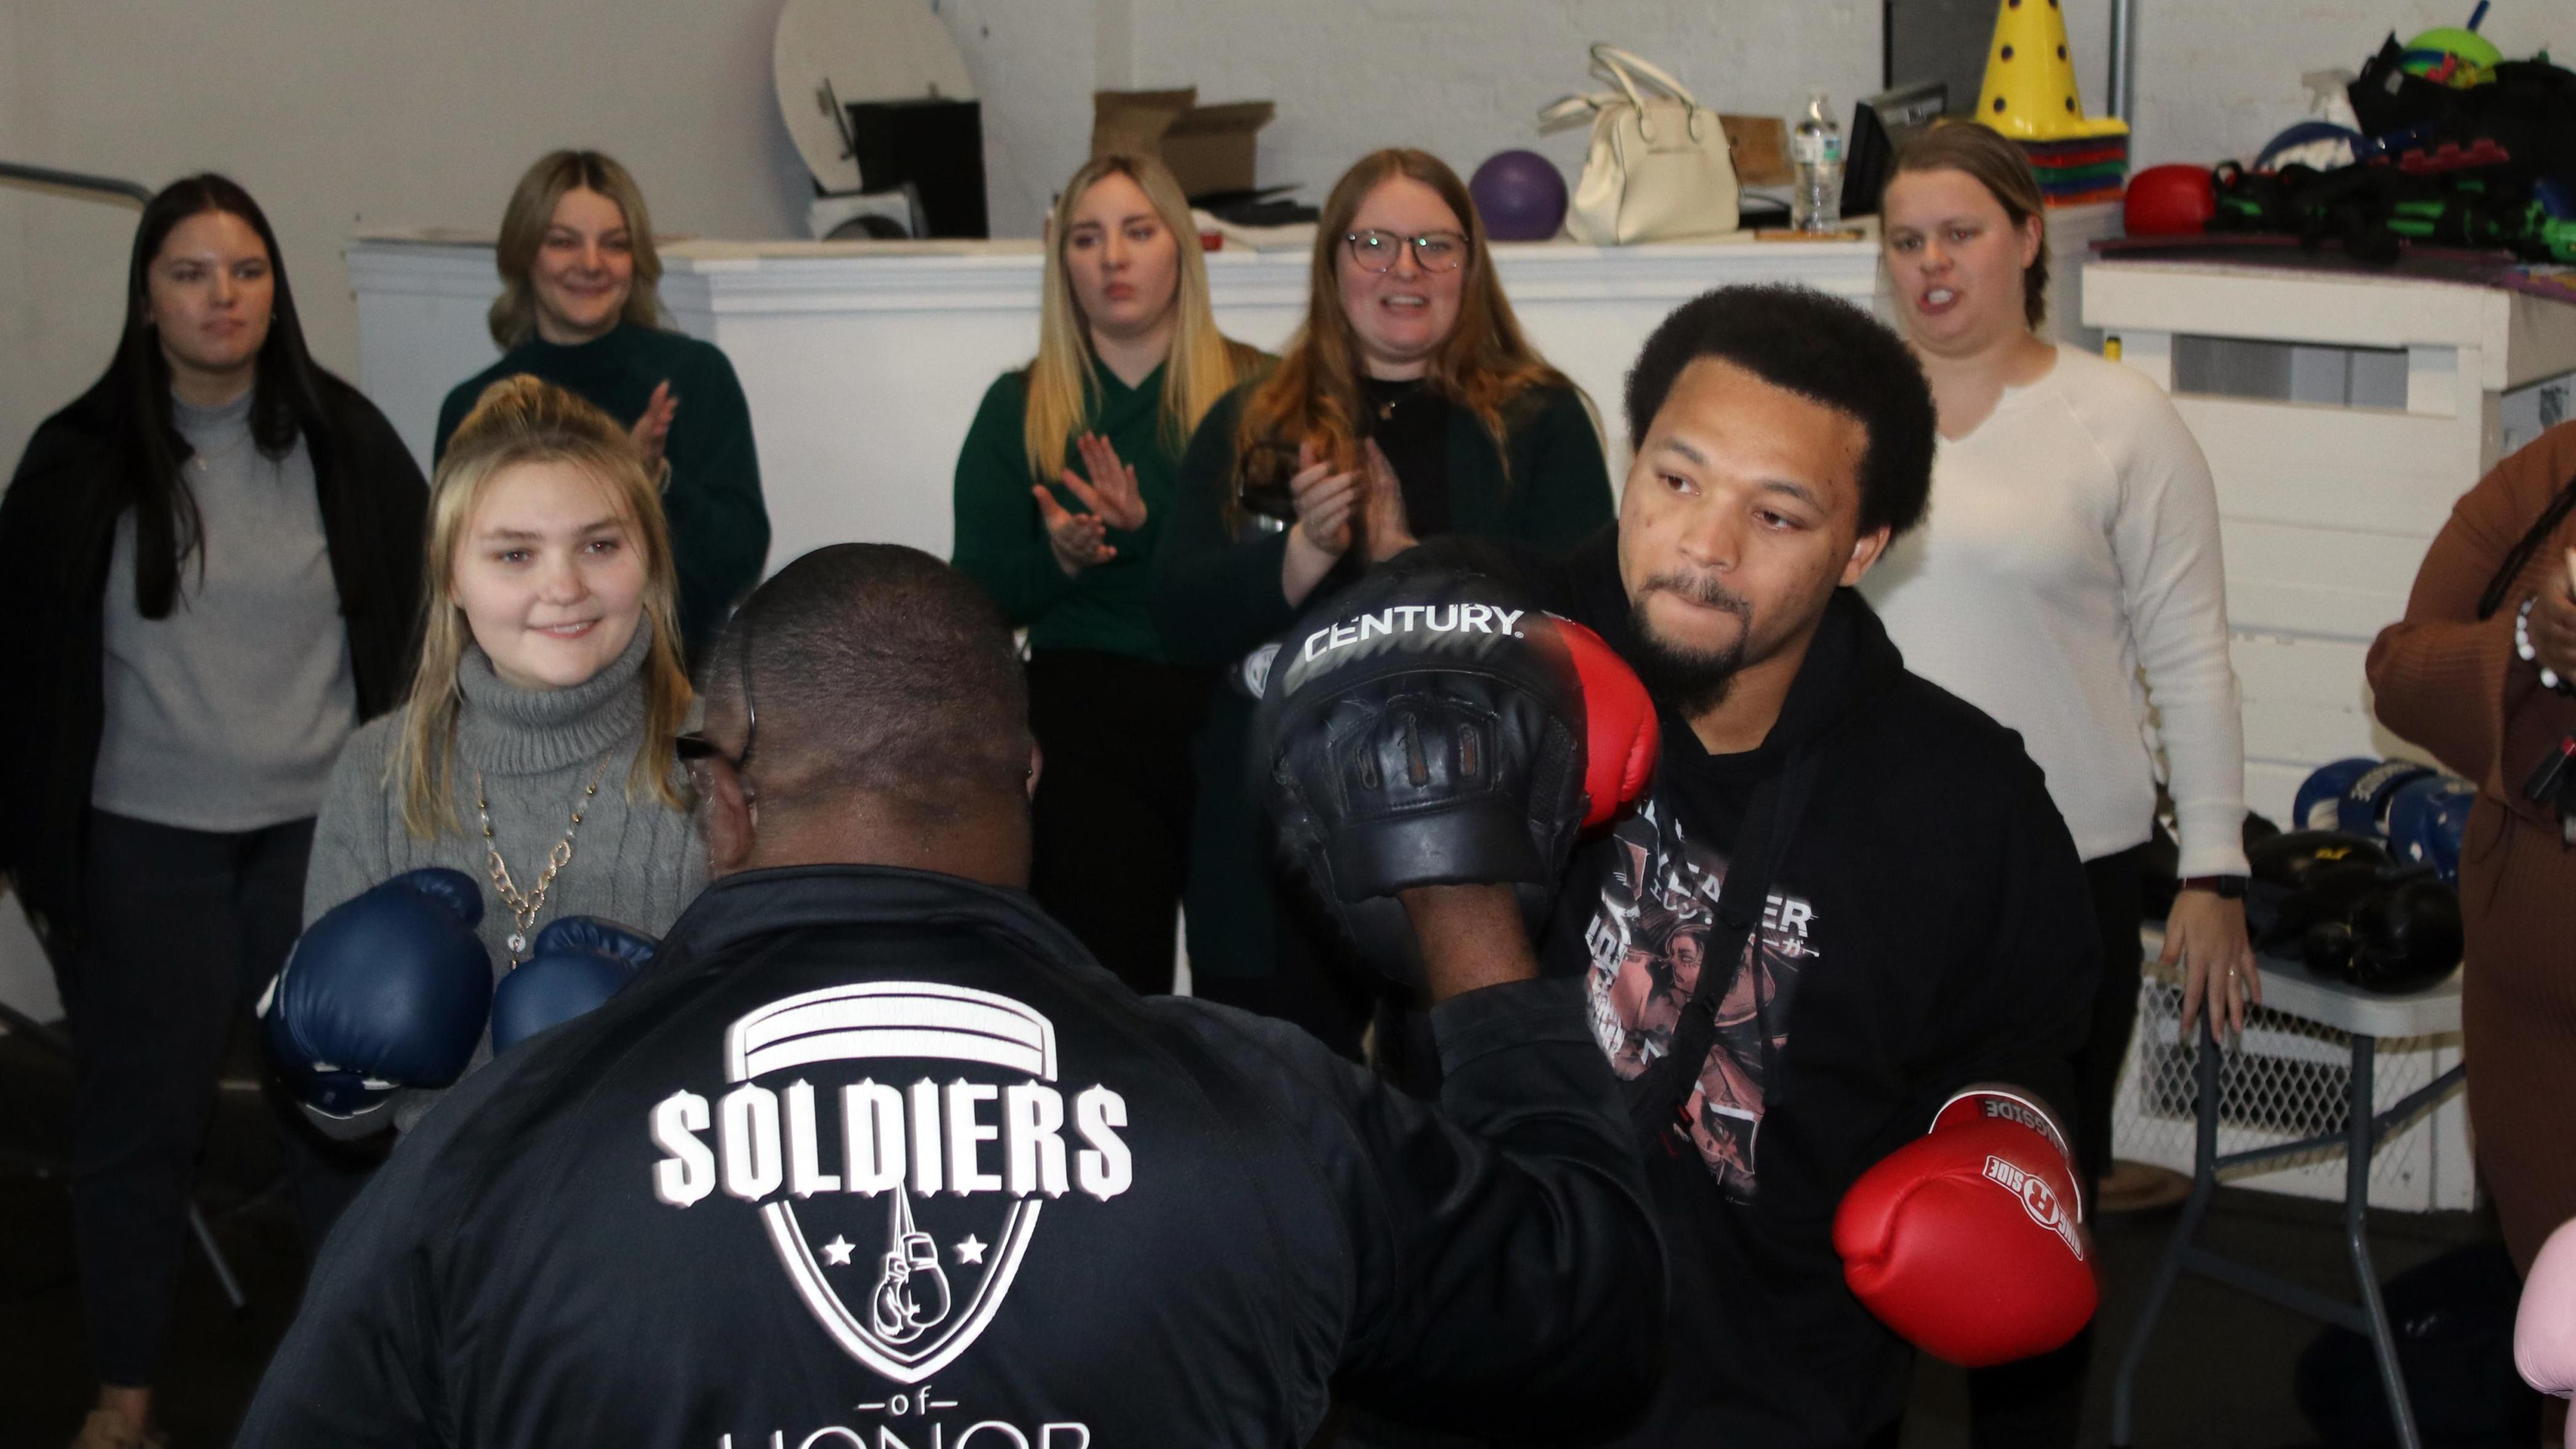 Social work students box at Soldiers of Honor